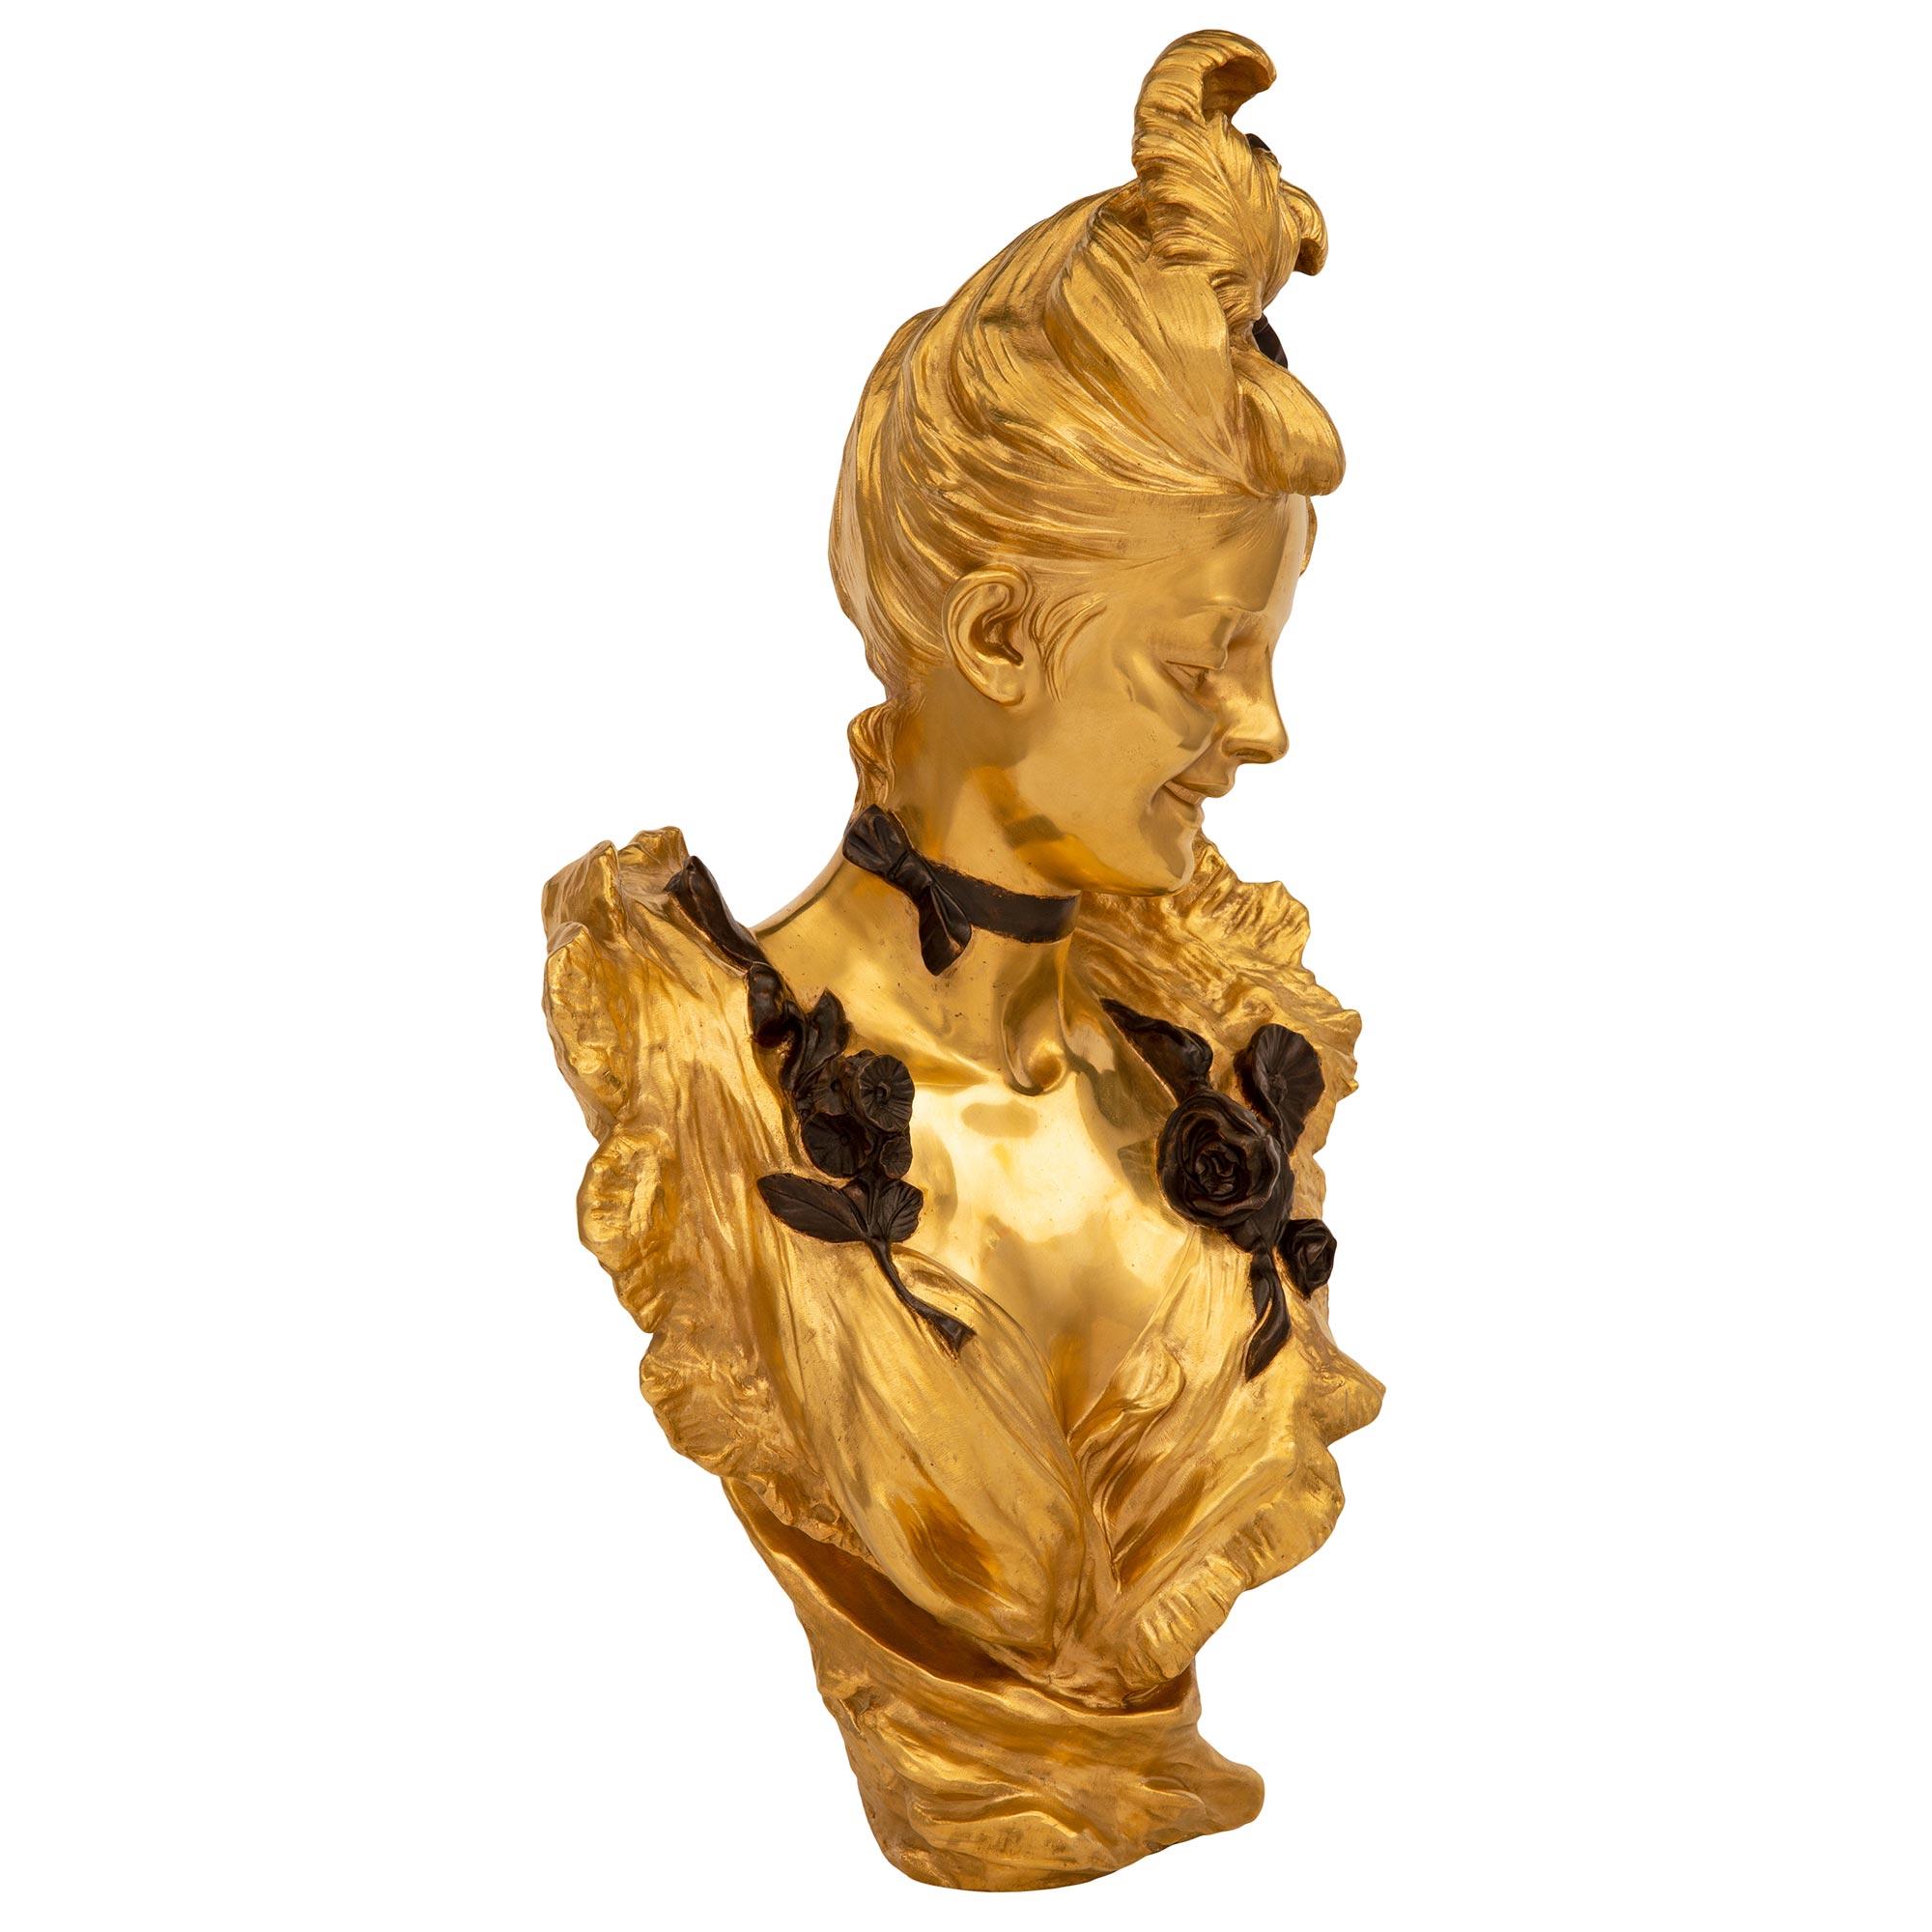 An exceptional and most elegant French 19th century Louis XVI st. Belle Époque period ormolu and patinated bronze bust of a beautiful young maiden, signed V. Bruyneel. The bust is raised by a lovely wonderfully executed flowing garment leading